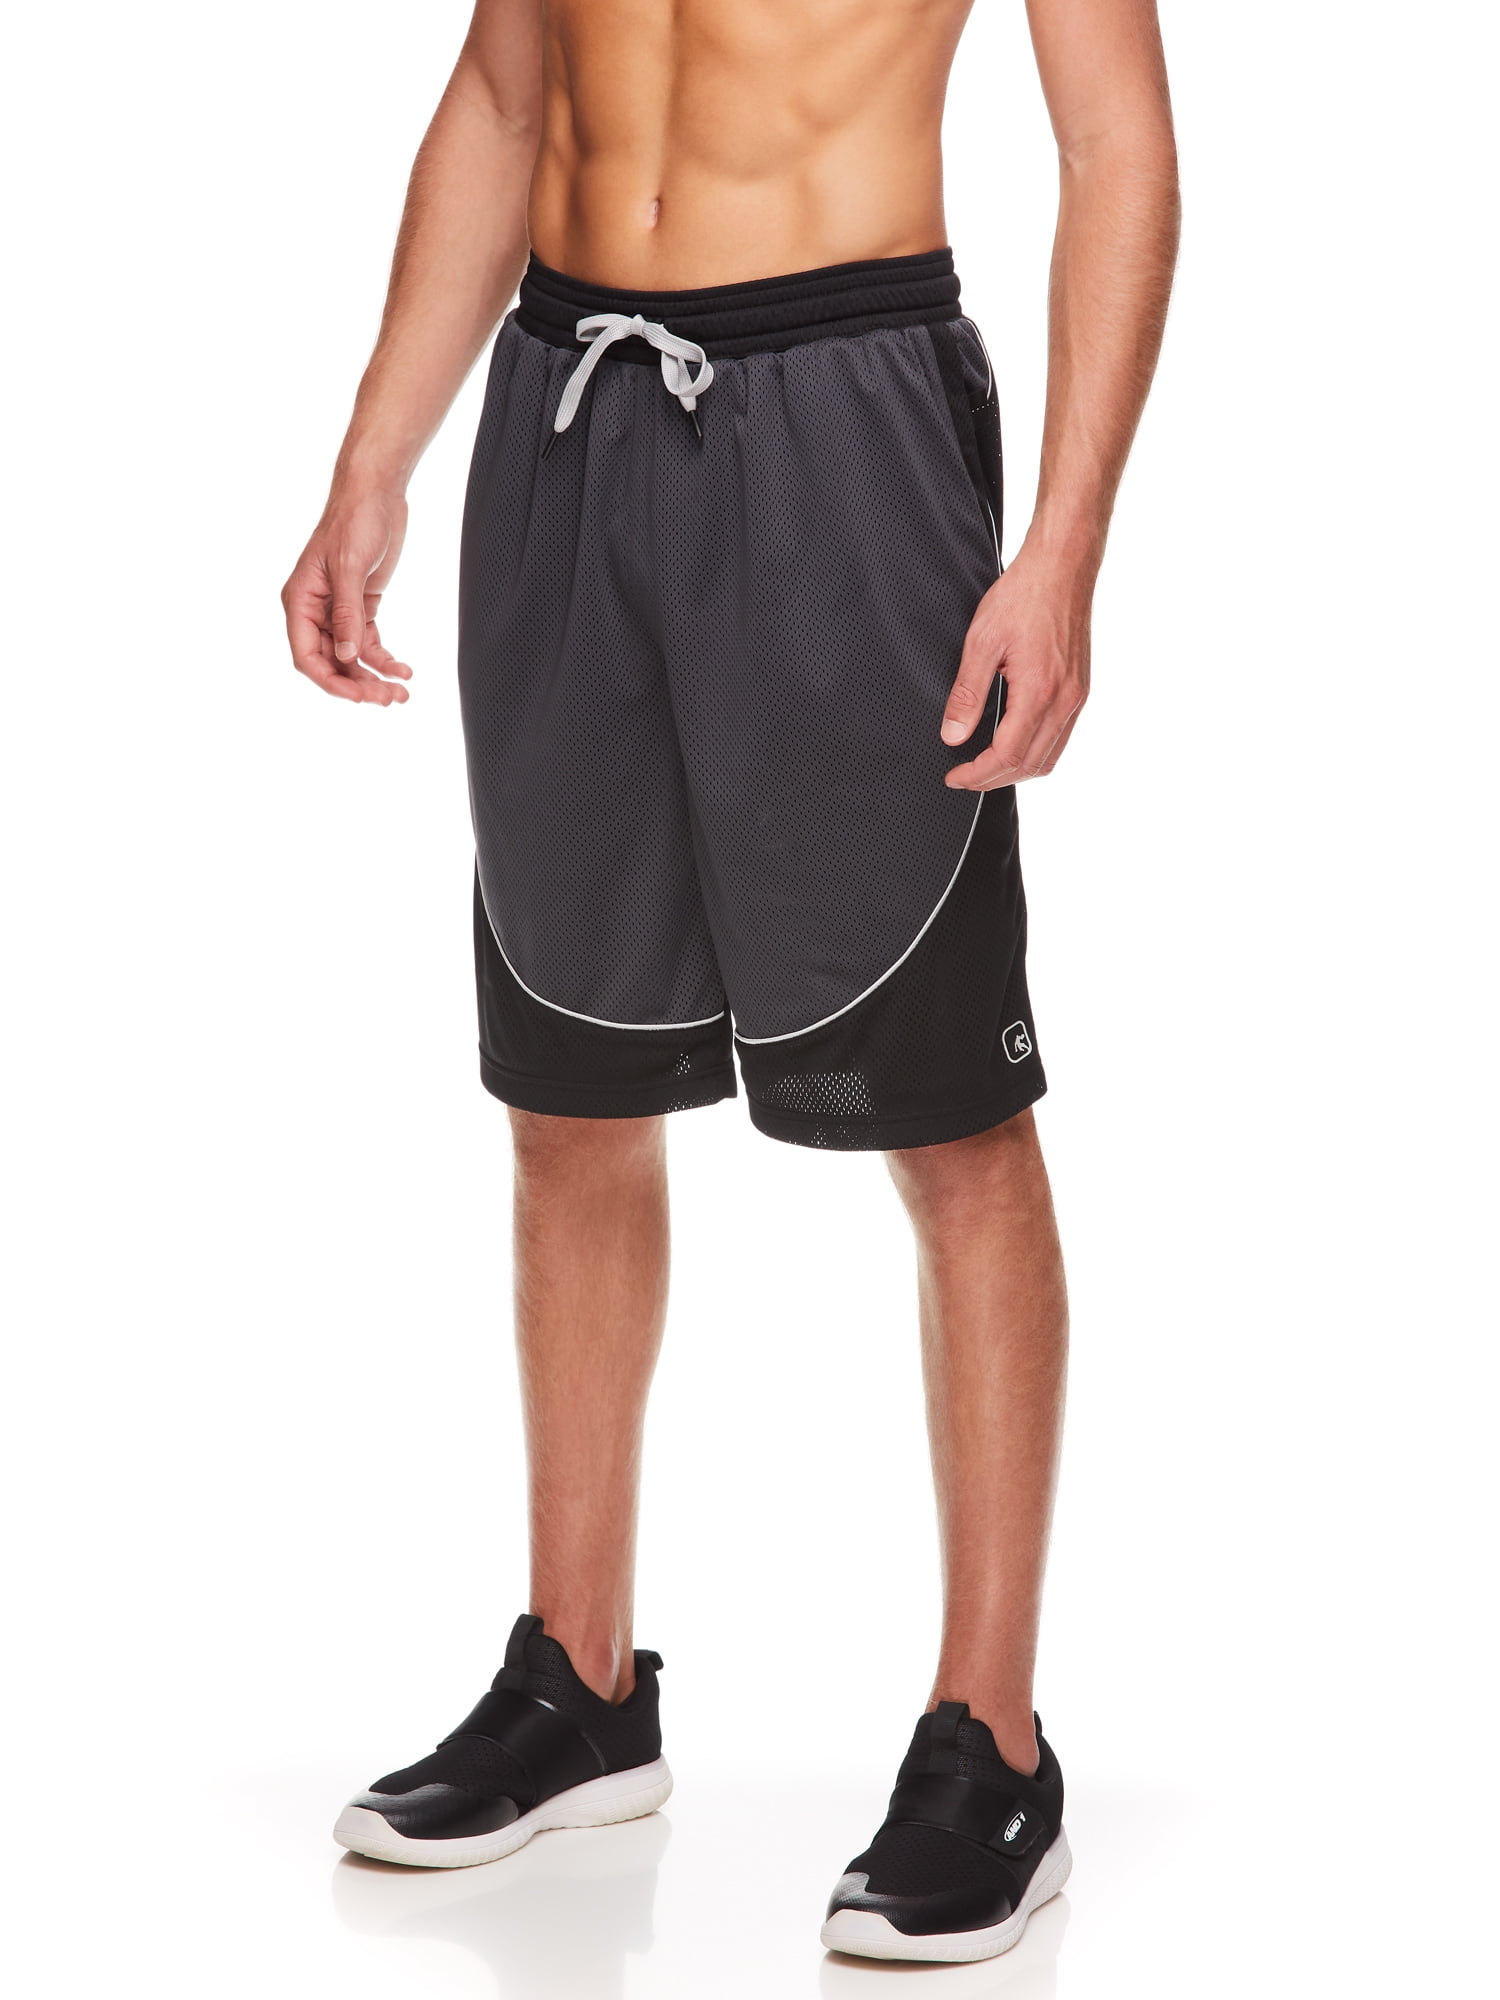 **** New Mens Basketball Shorts by And1.**Adjustable Elastic Waist Size L.**** 